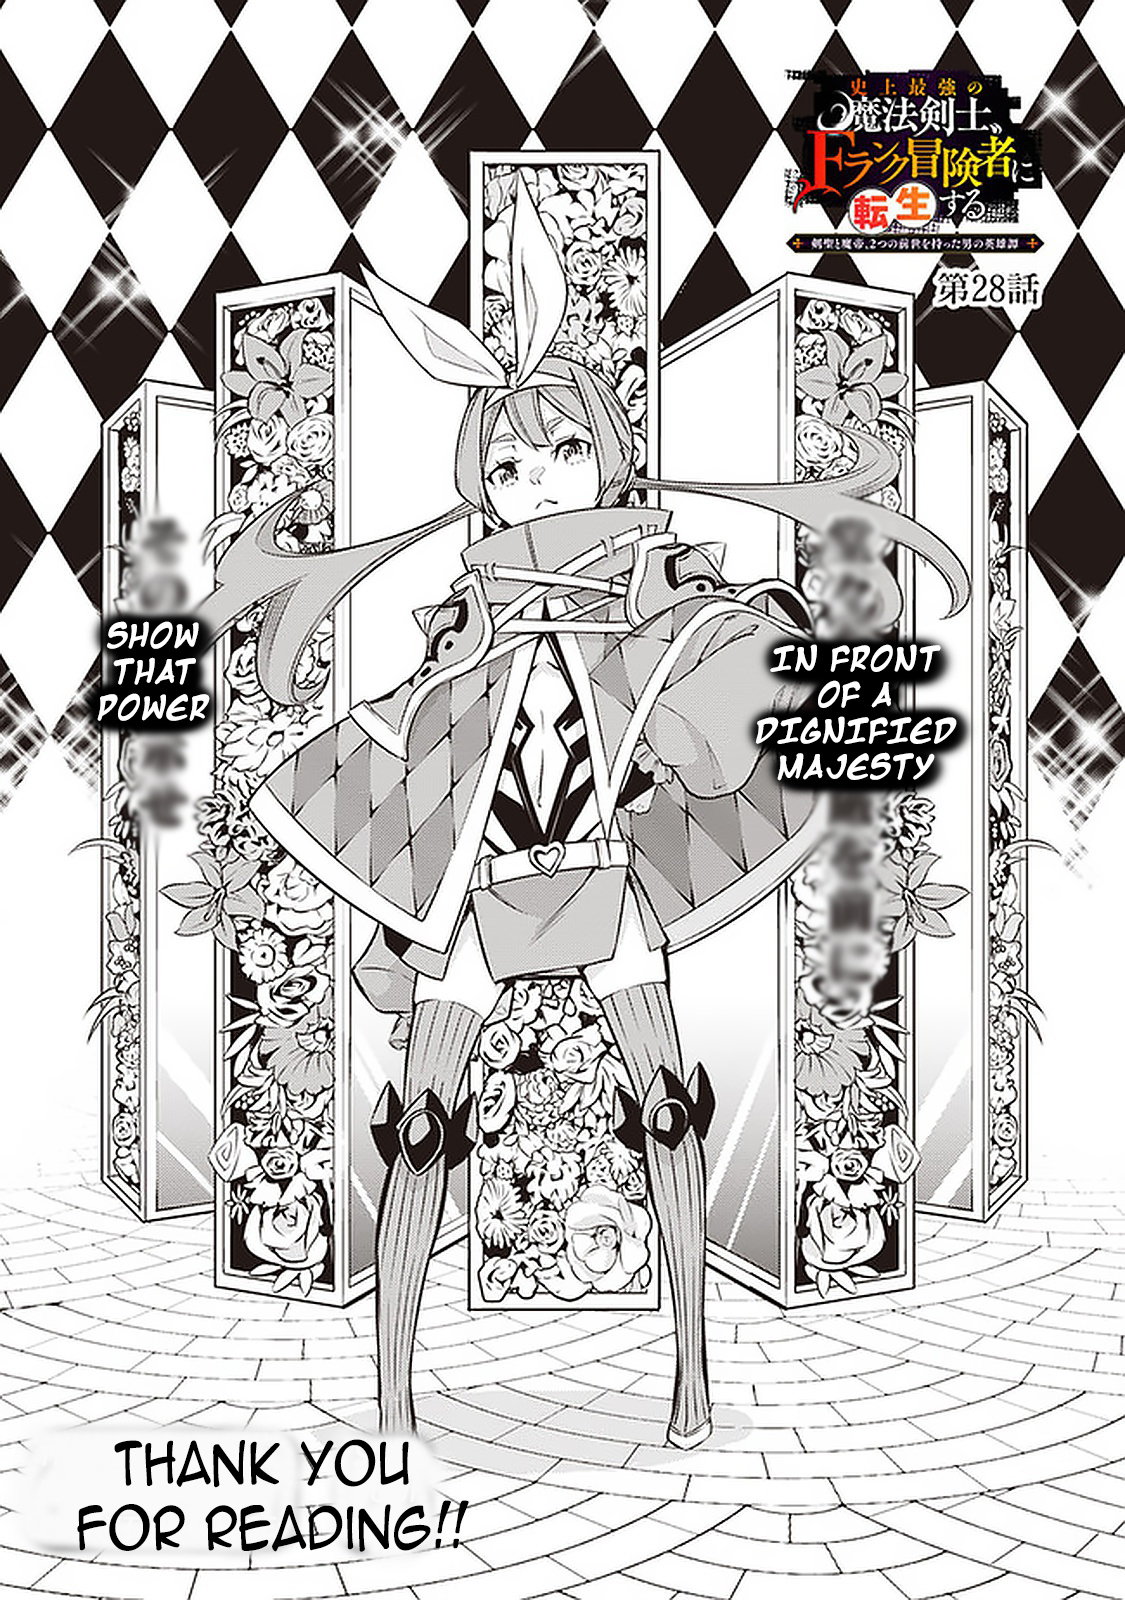 The Strongest Magical Swordsman Ever Reborn As An F-Rank Adventurer. Vol.3 Chapter 28 - Picture 2